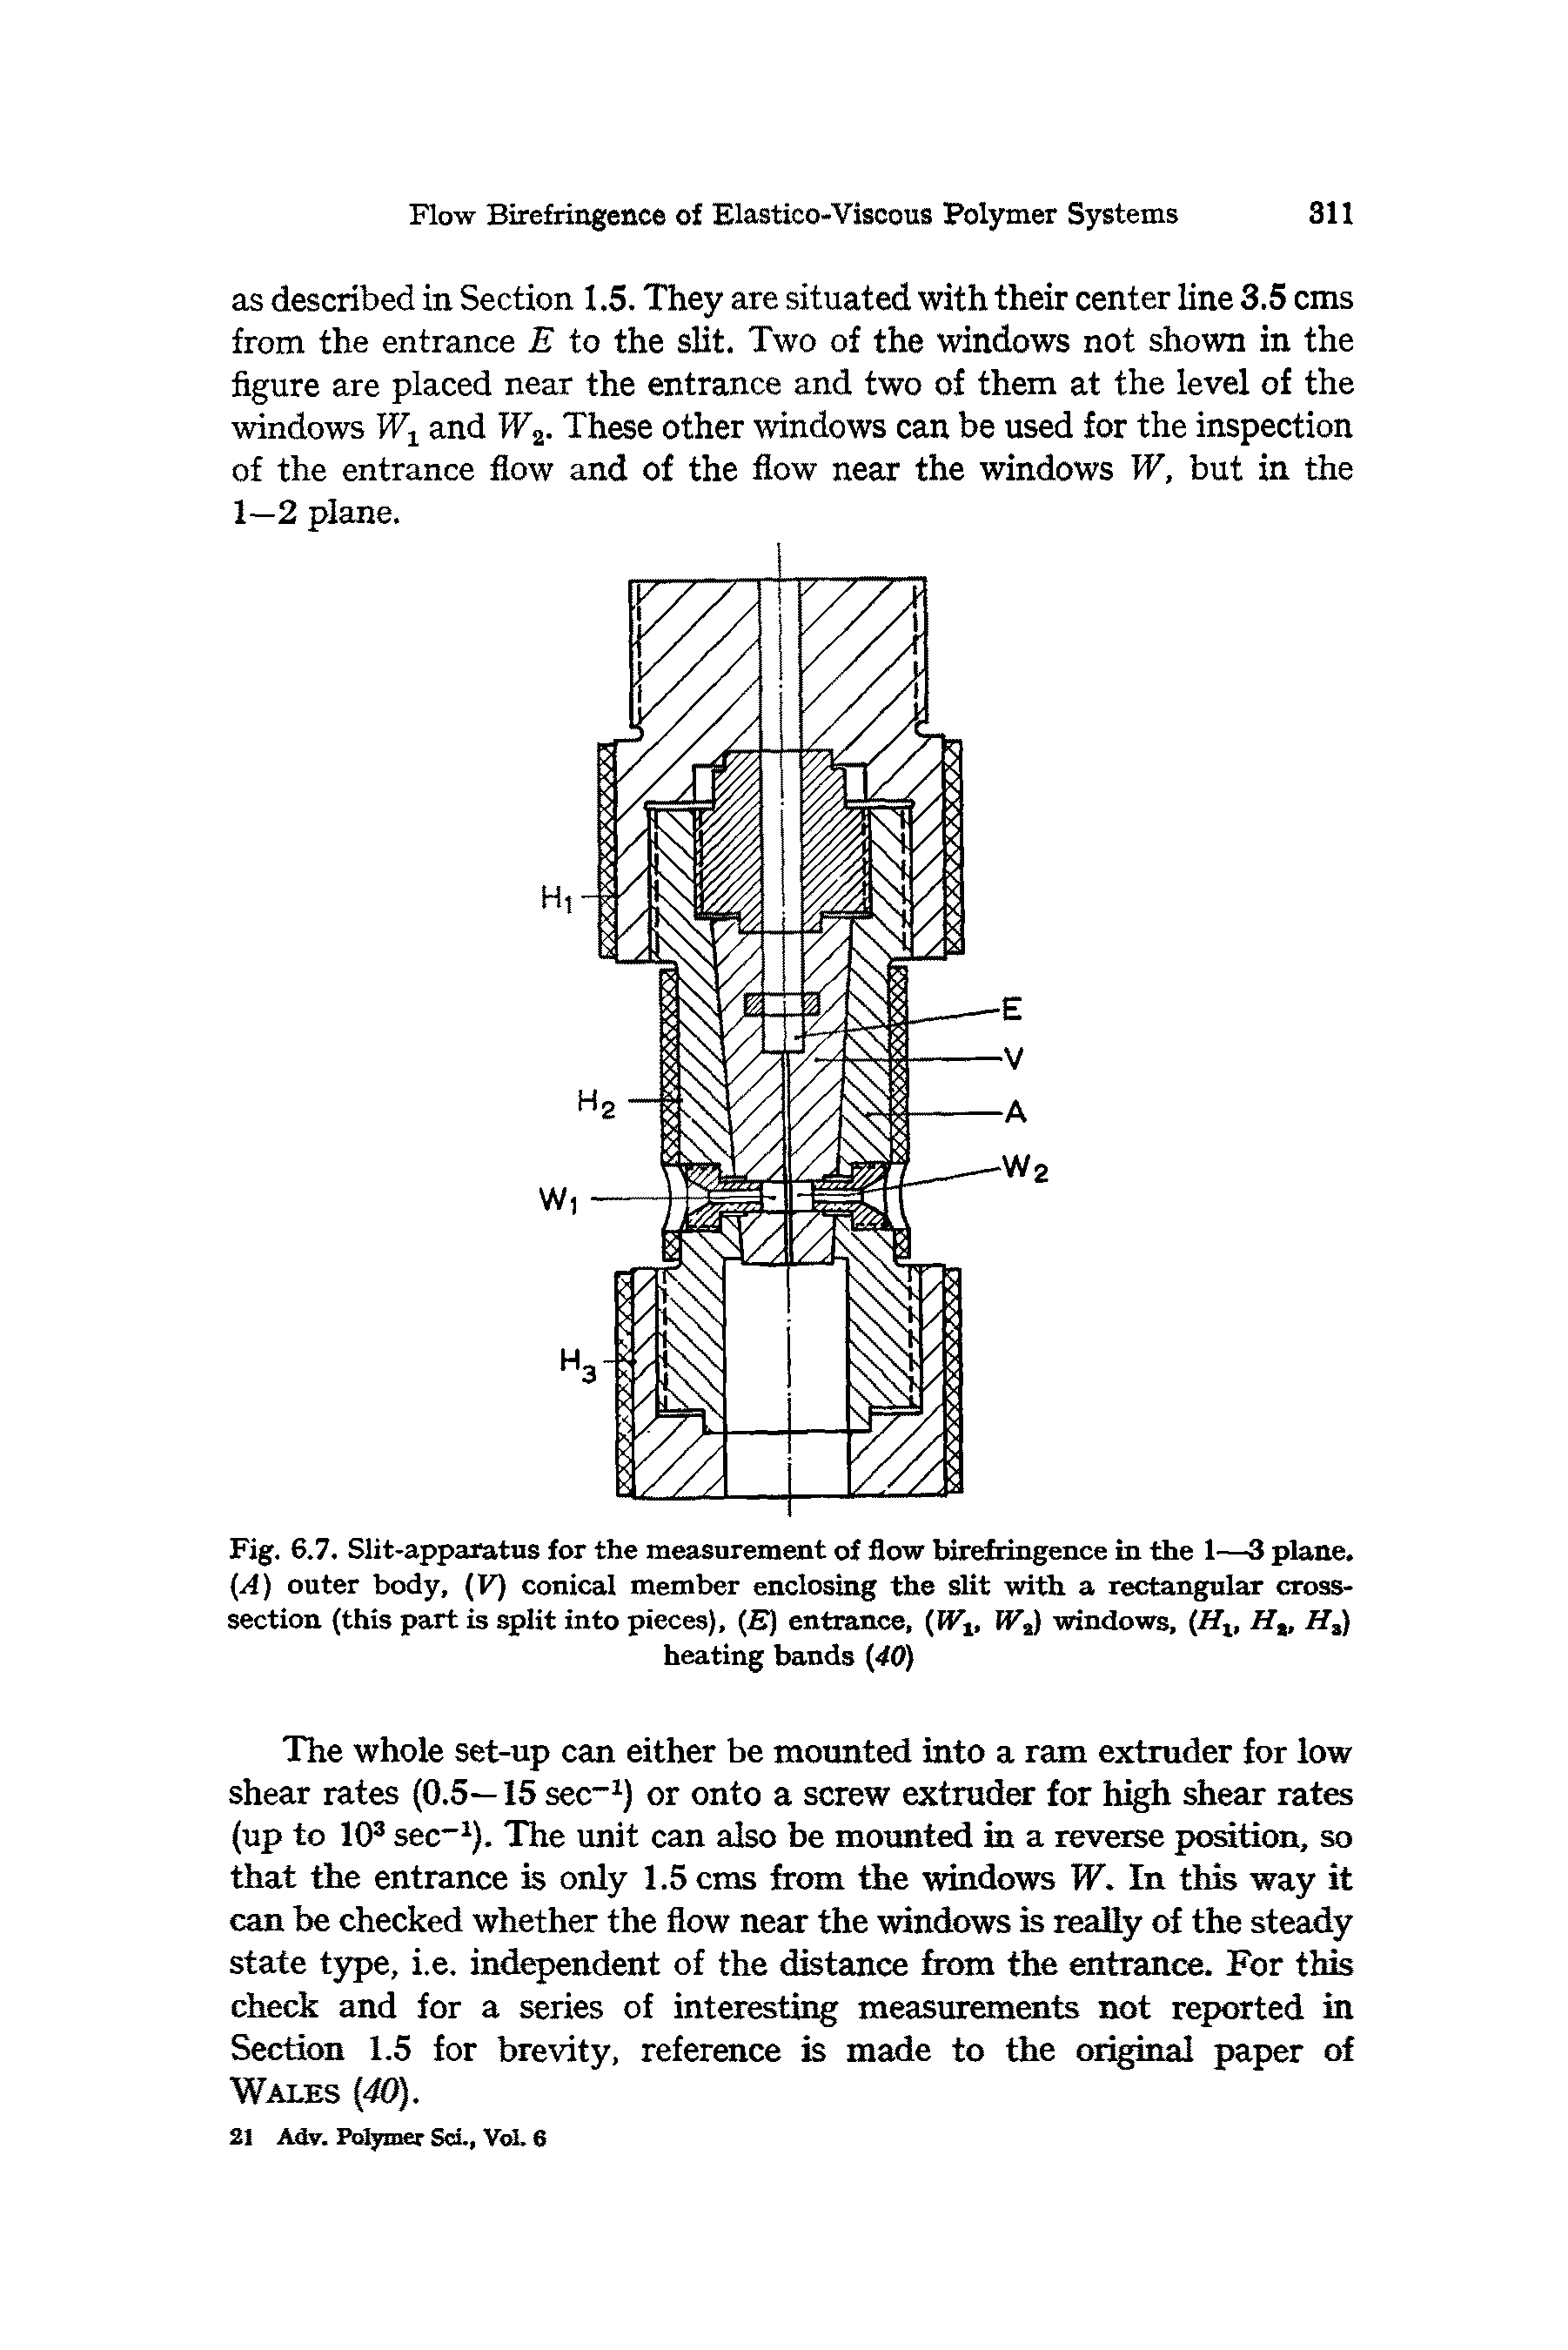 Fig. 6.7. Slit-apparatus for the measurement of flow birefringence in the 1—3 plane. (A) outer body, (V) conical member enclosing the slit with a rectangular cross-section (this part is split into pieces), (E) entrance, (Wt, IV2) windows, (Hlt Ht, Ha)...